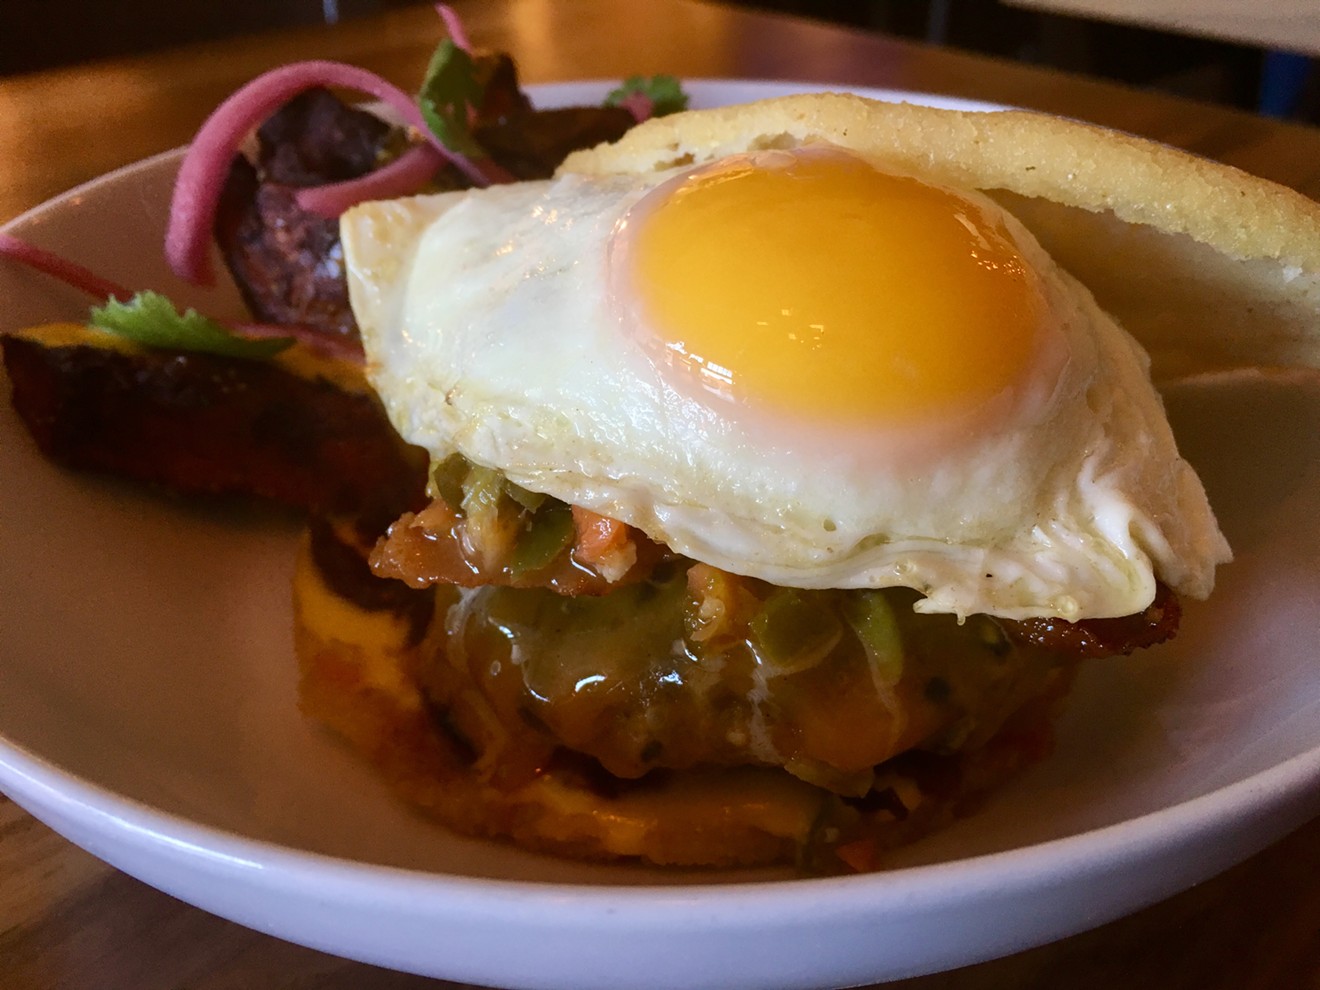 The arepa burger at Shoals in Deep Ellum, topped with a sunny egg for $7 at happy hour ($14 regularly).